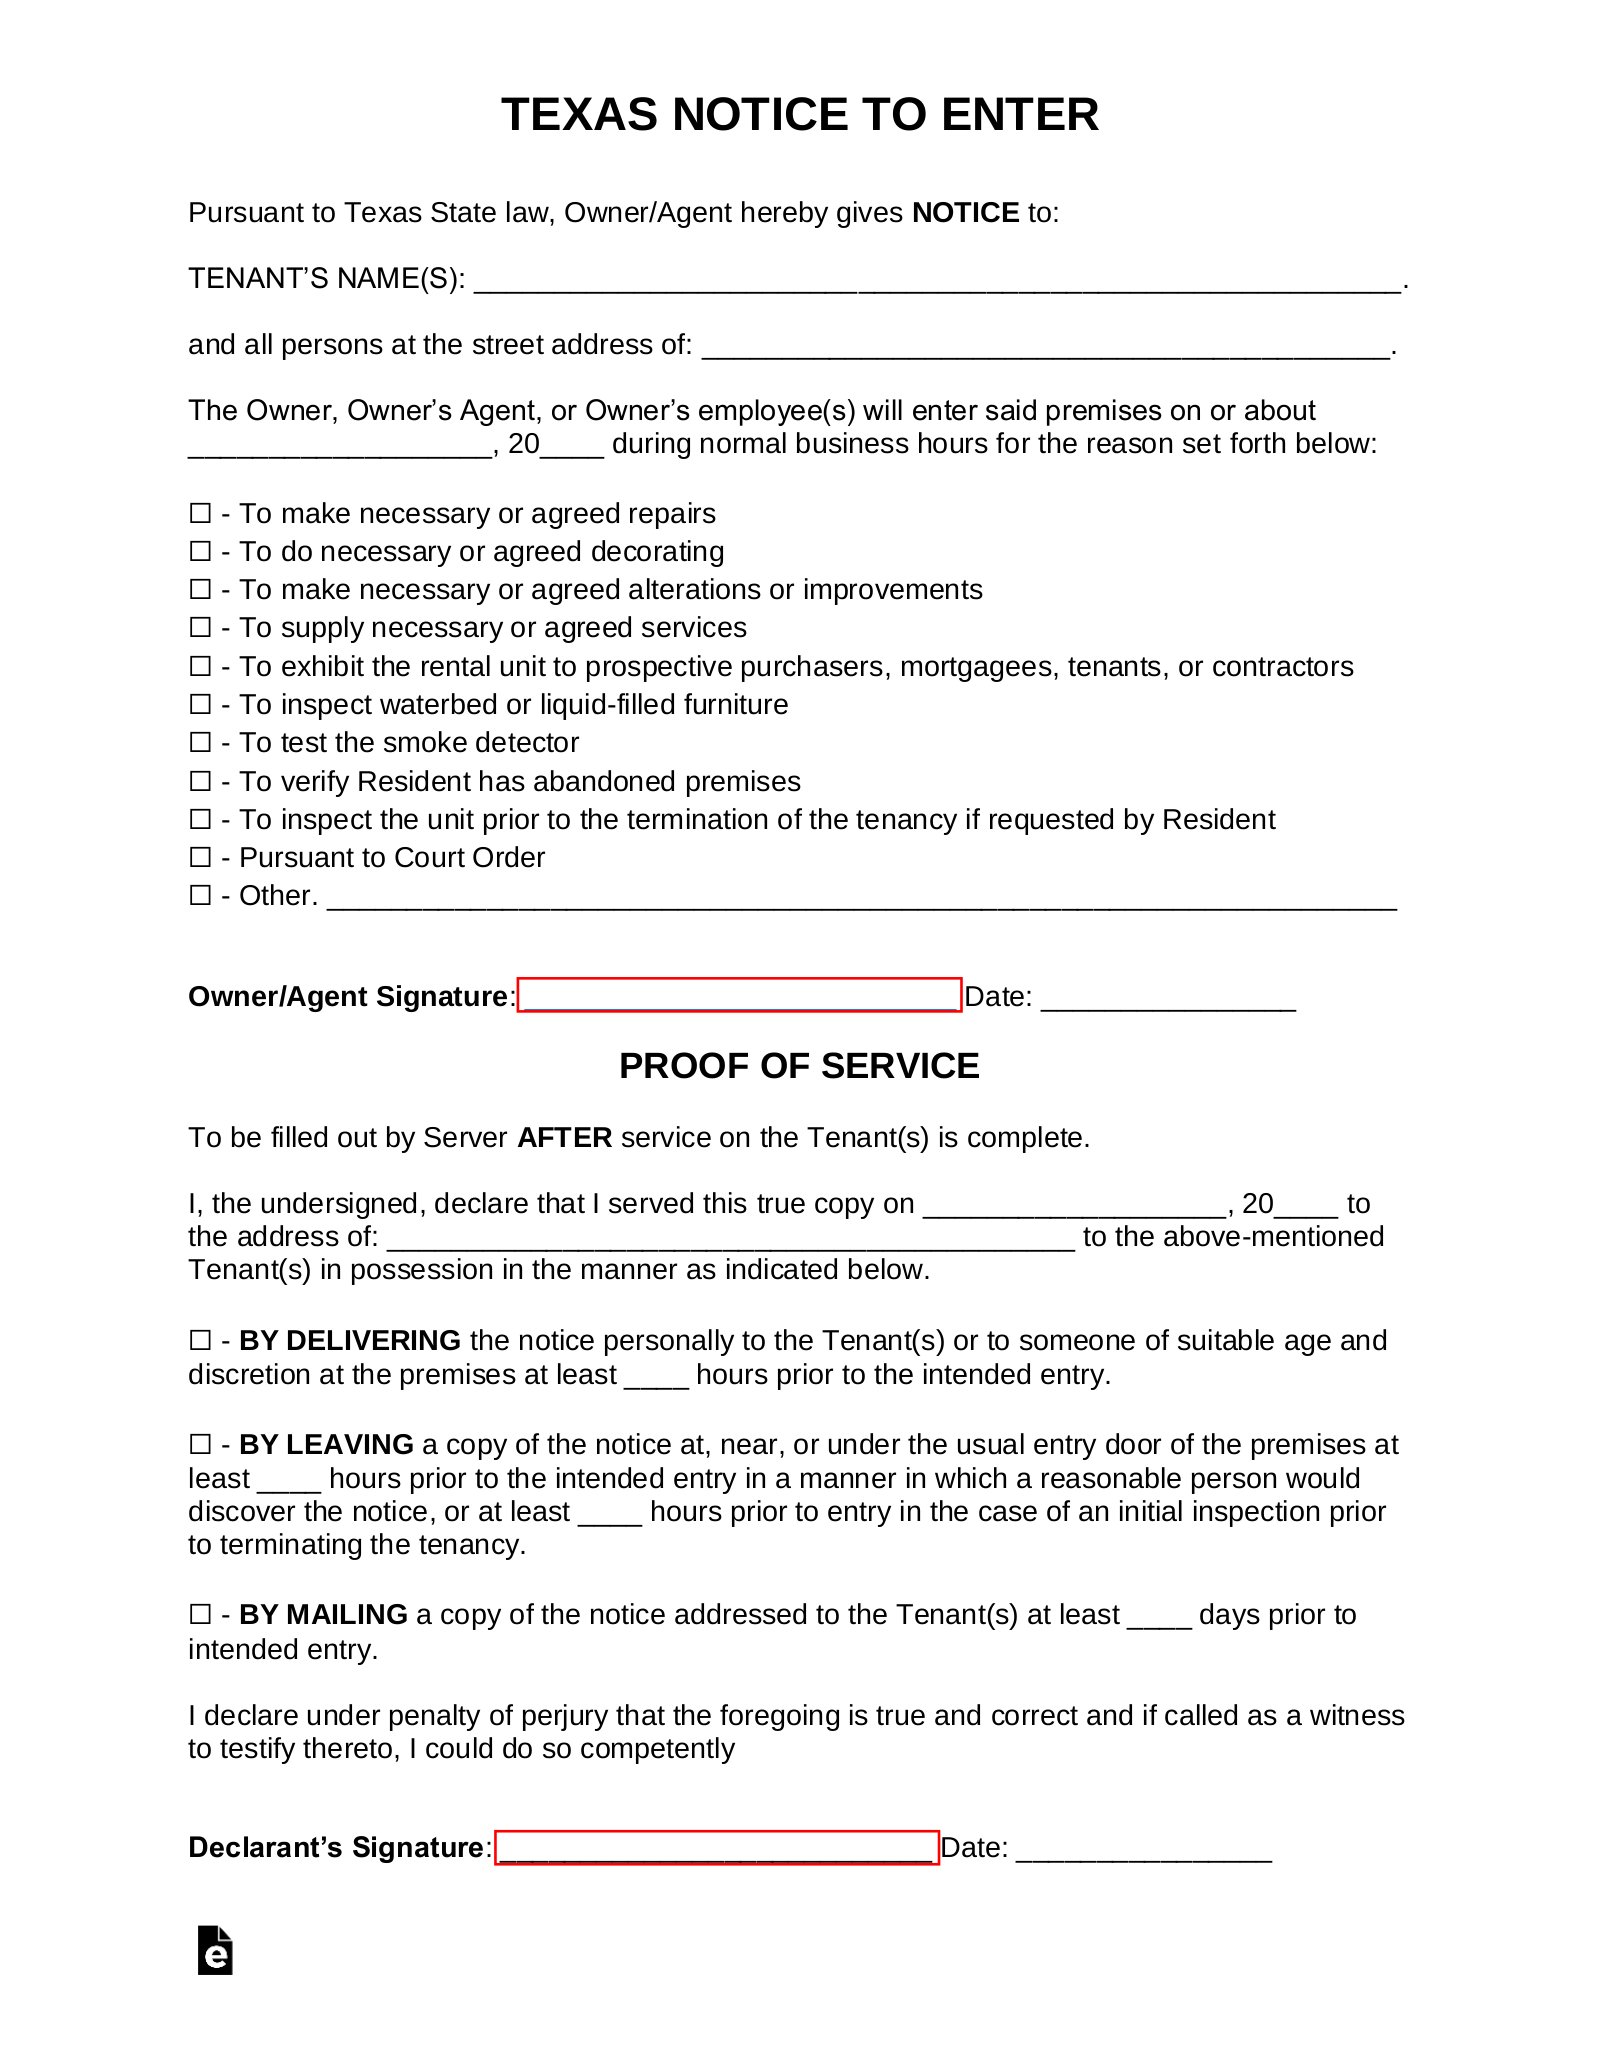 Texas Landlord Notice to Enter Form